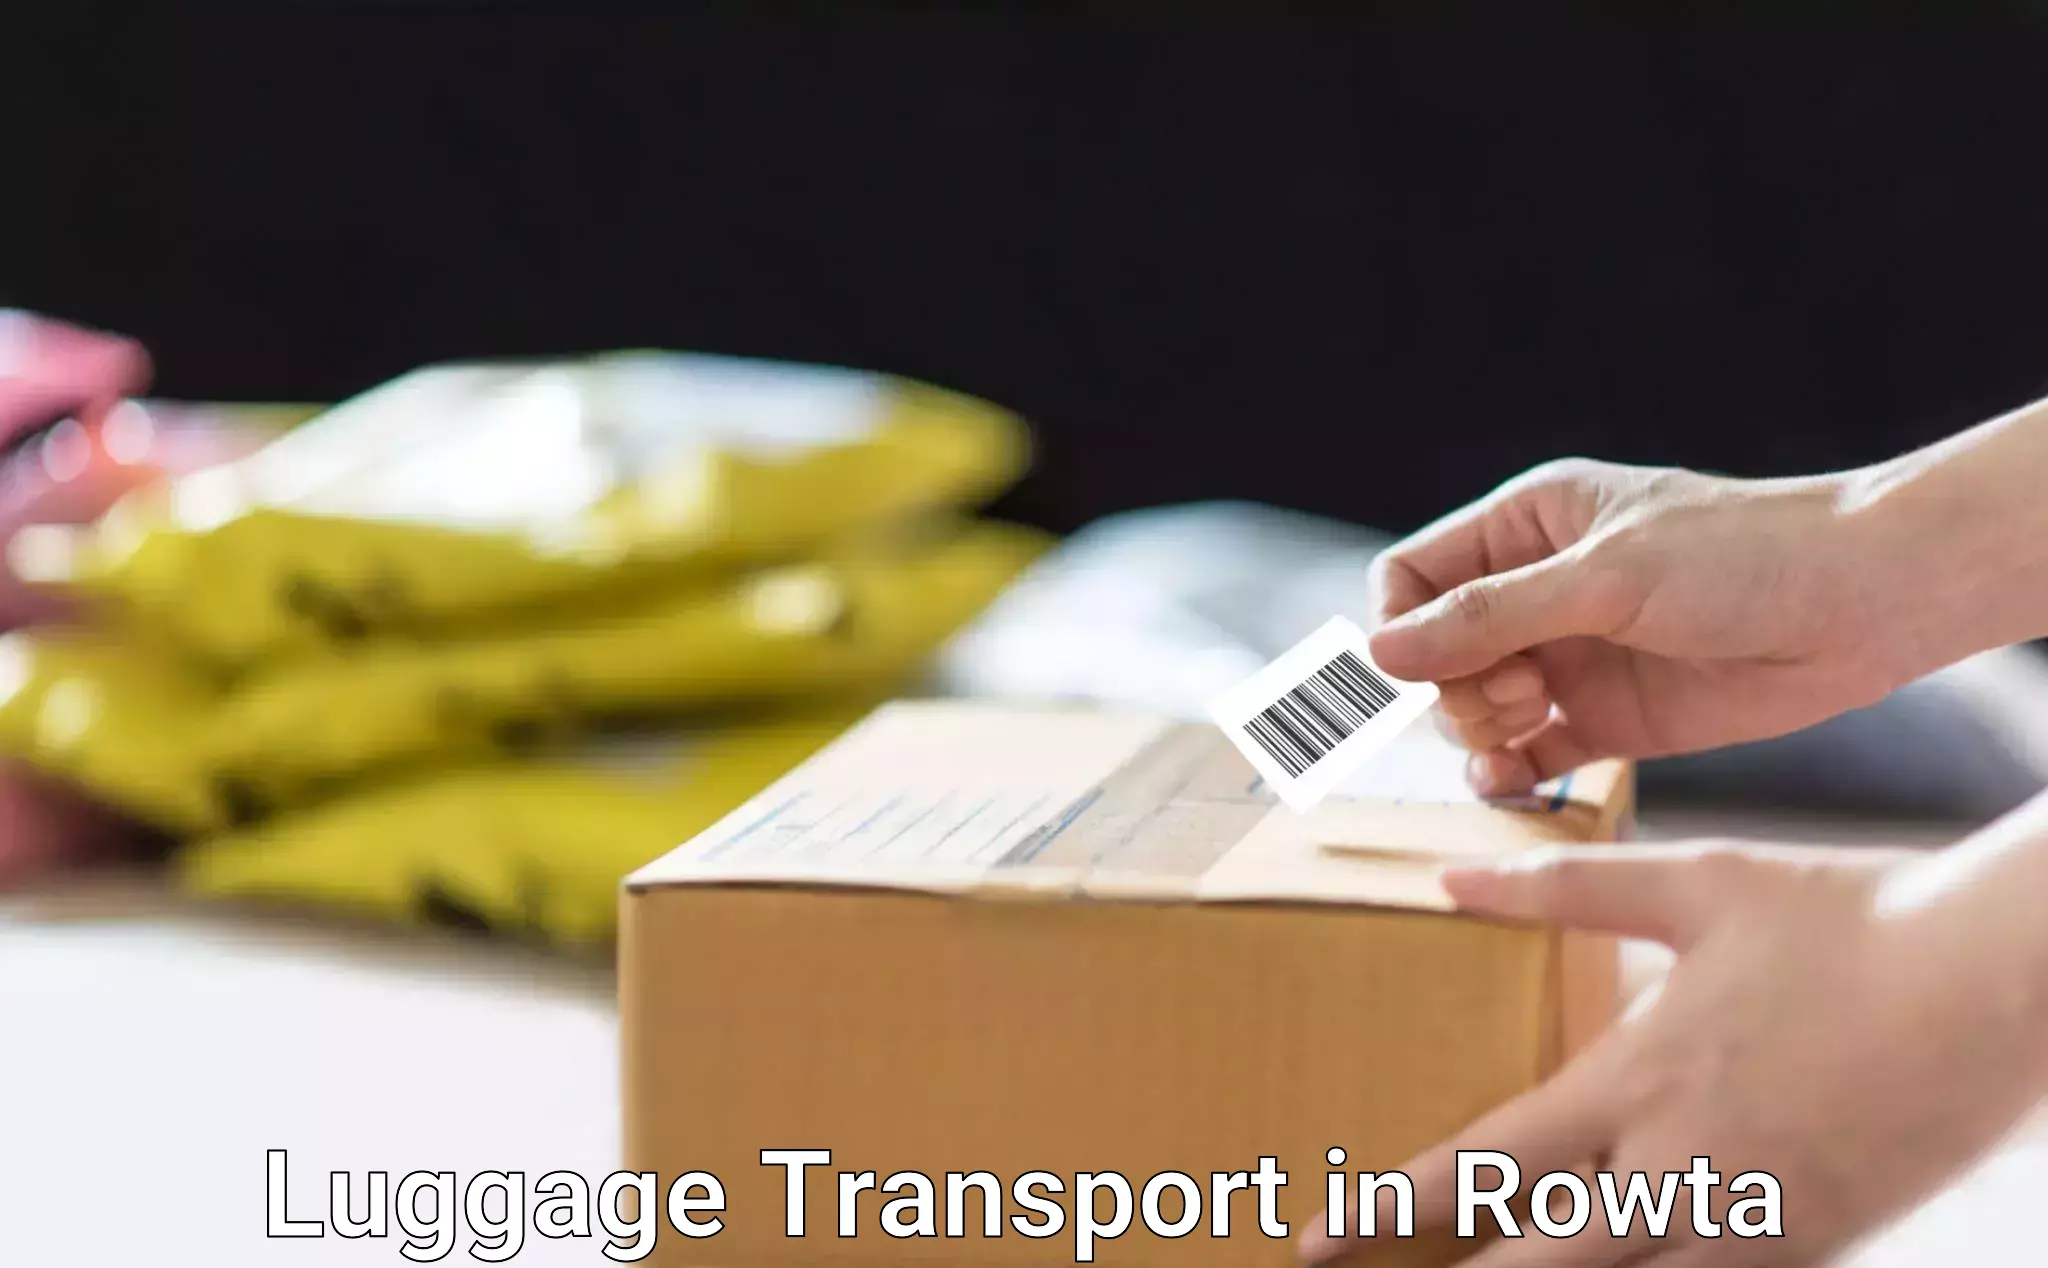 Doorstep luggage collection in Rowta